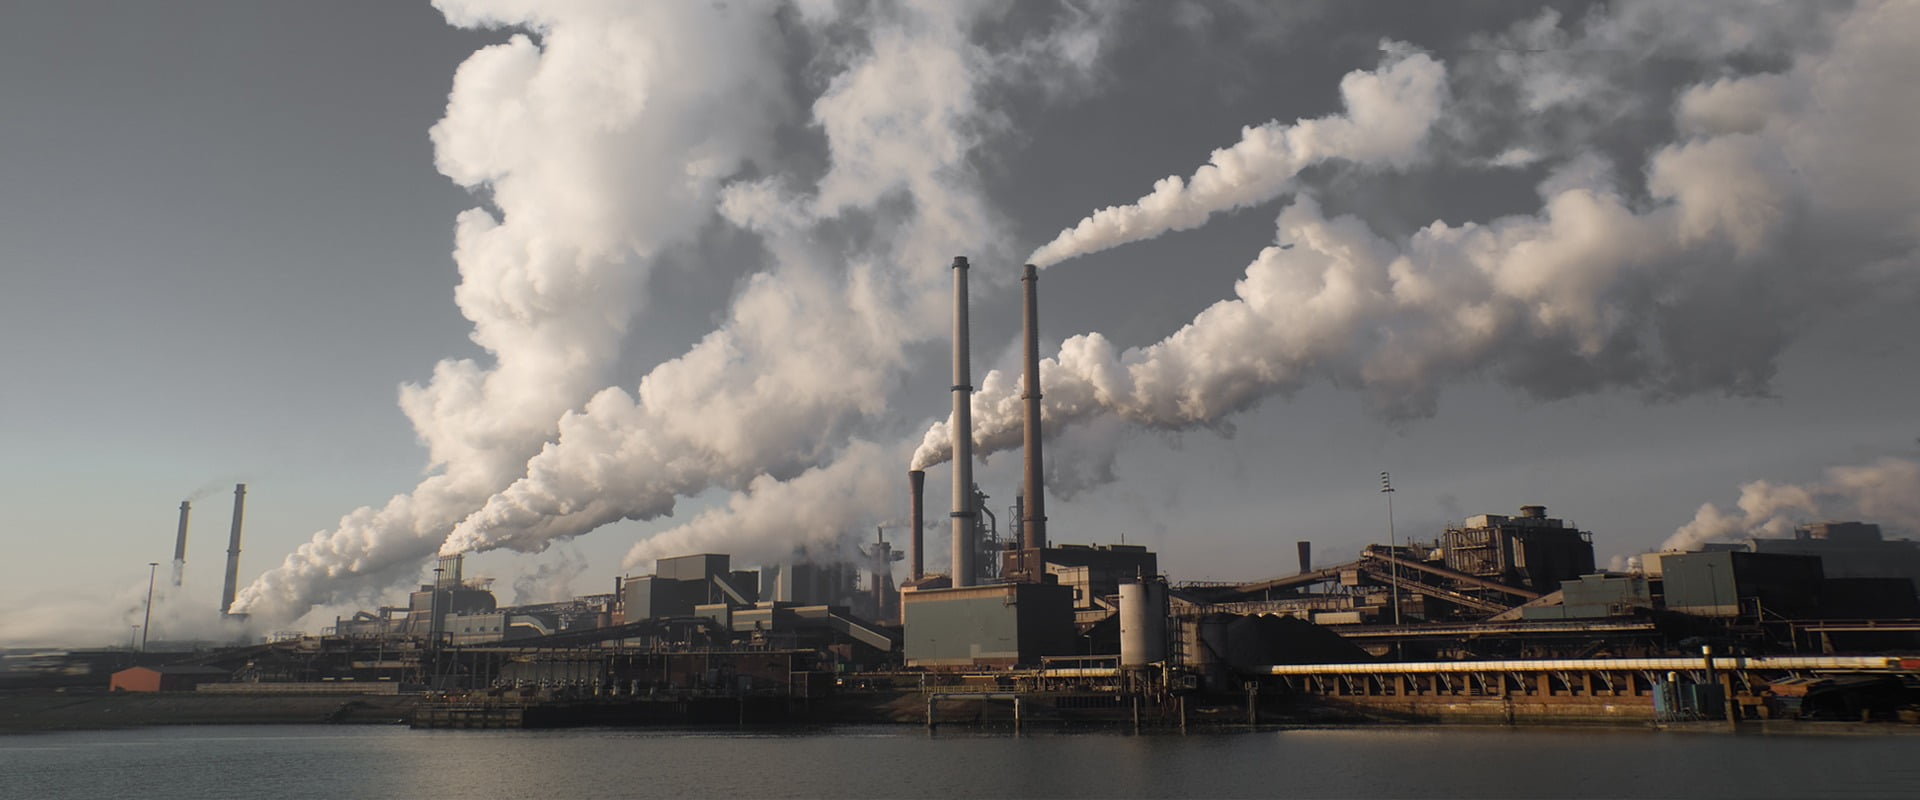 Power station, Cloud, Water, Sky, Pollution, Industry, Chimney, Electricity